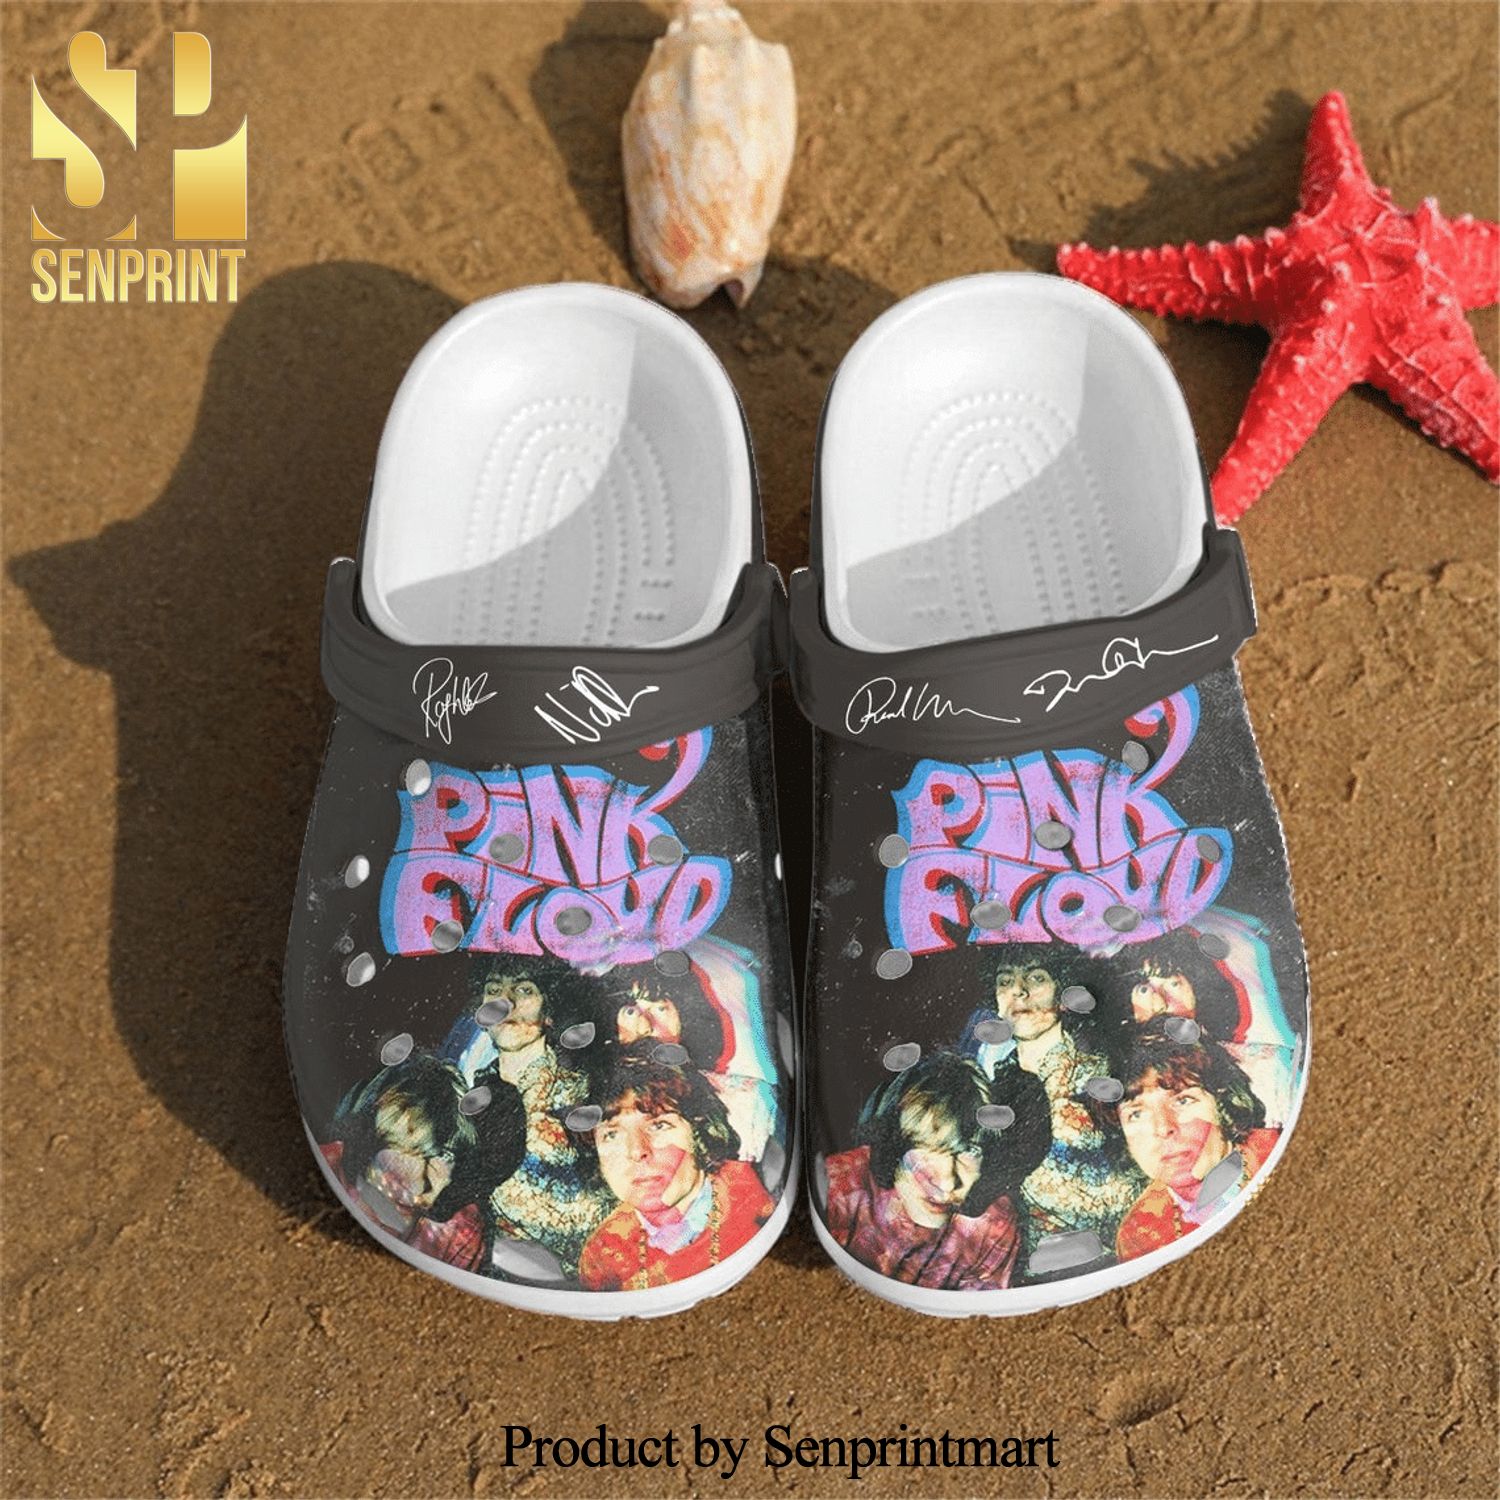 Pink Floyd Band For Men And Women All Over Printed Crocs Crocband Clog